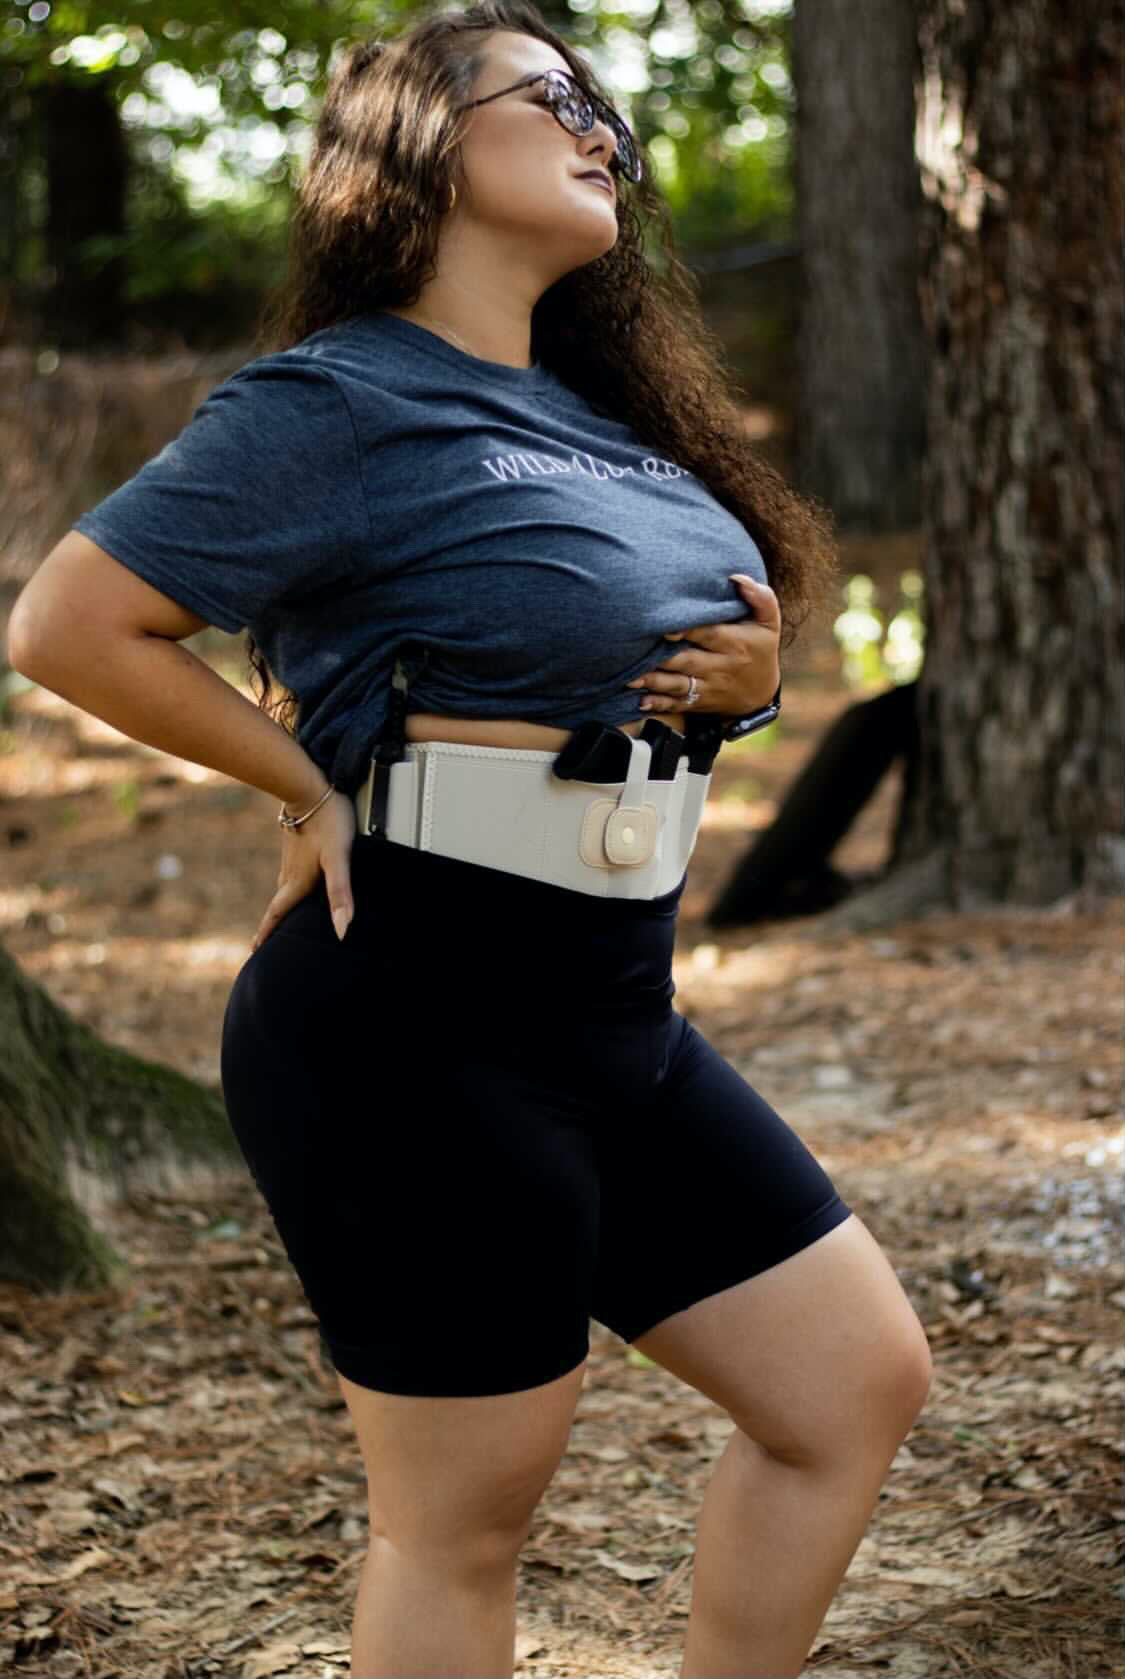 Tactical Belly Band Holster Concealed Hand Gun Carry Pistol Waist Right  Belt